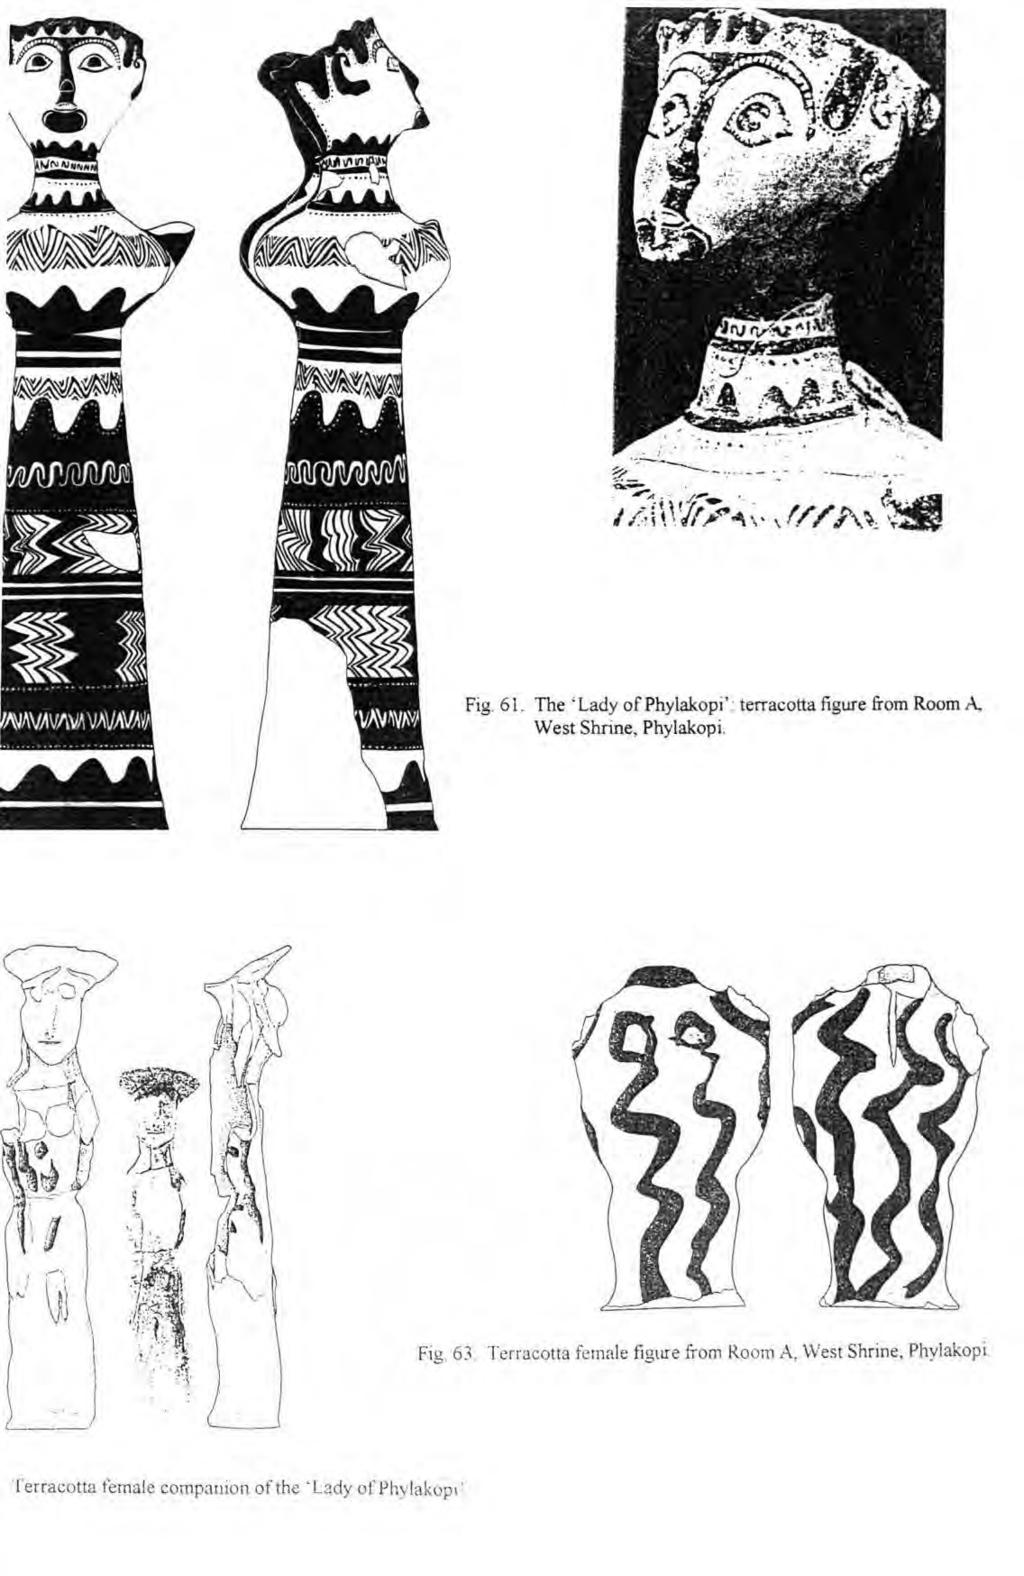 Fig. 61. The ' Lady of Phylakopi : terracotta figure from Room A, West Shrine, Phylakopi.